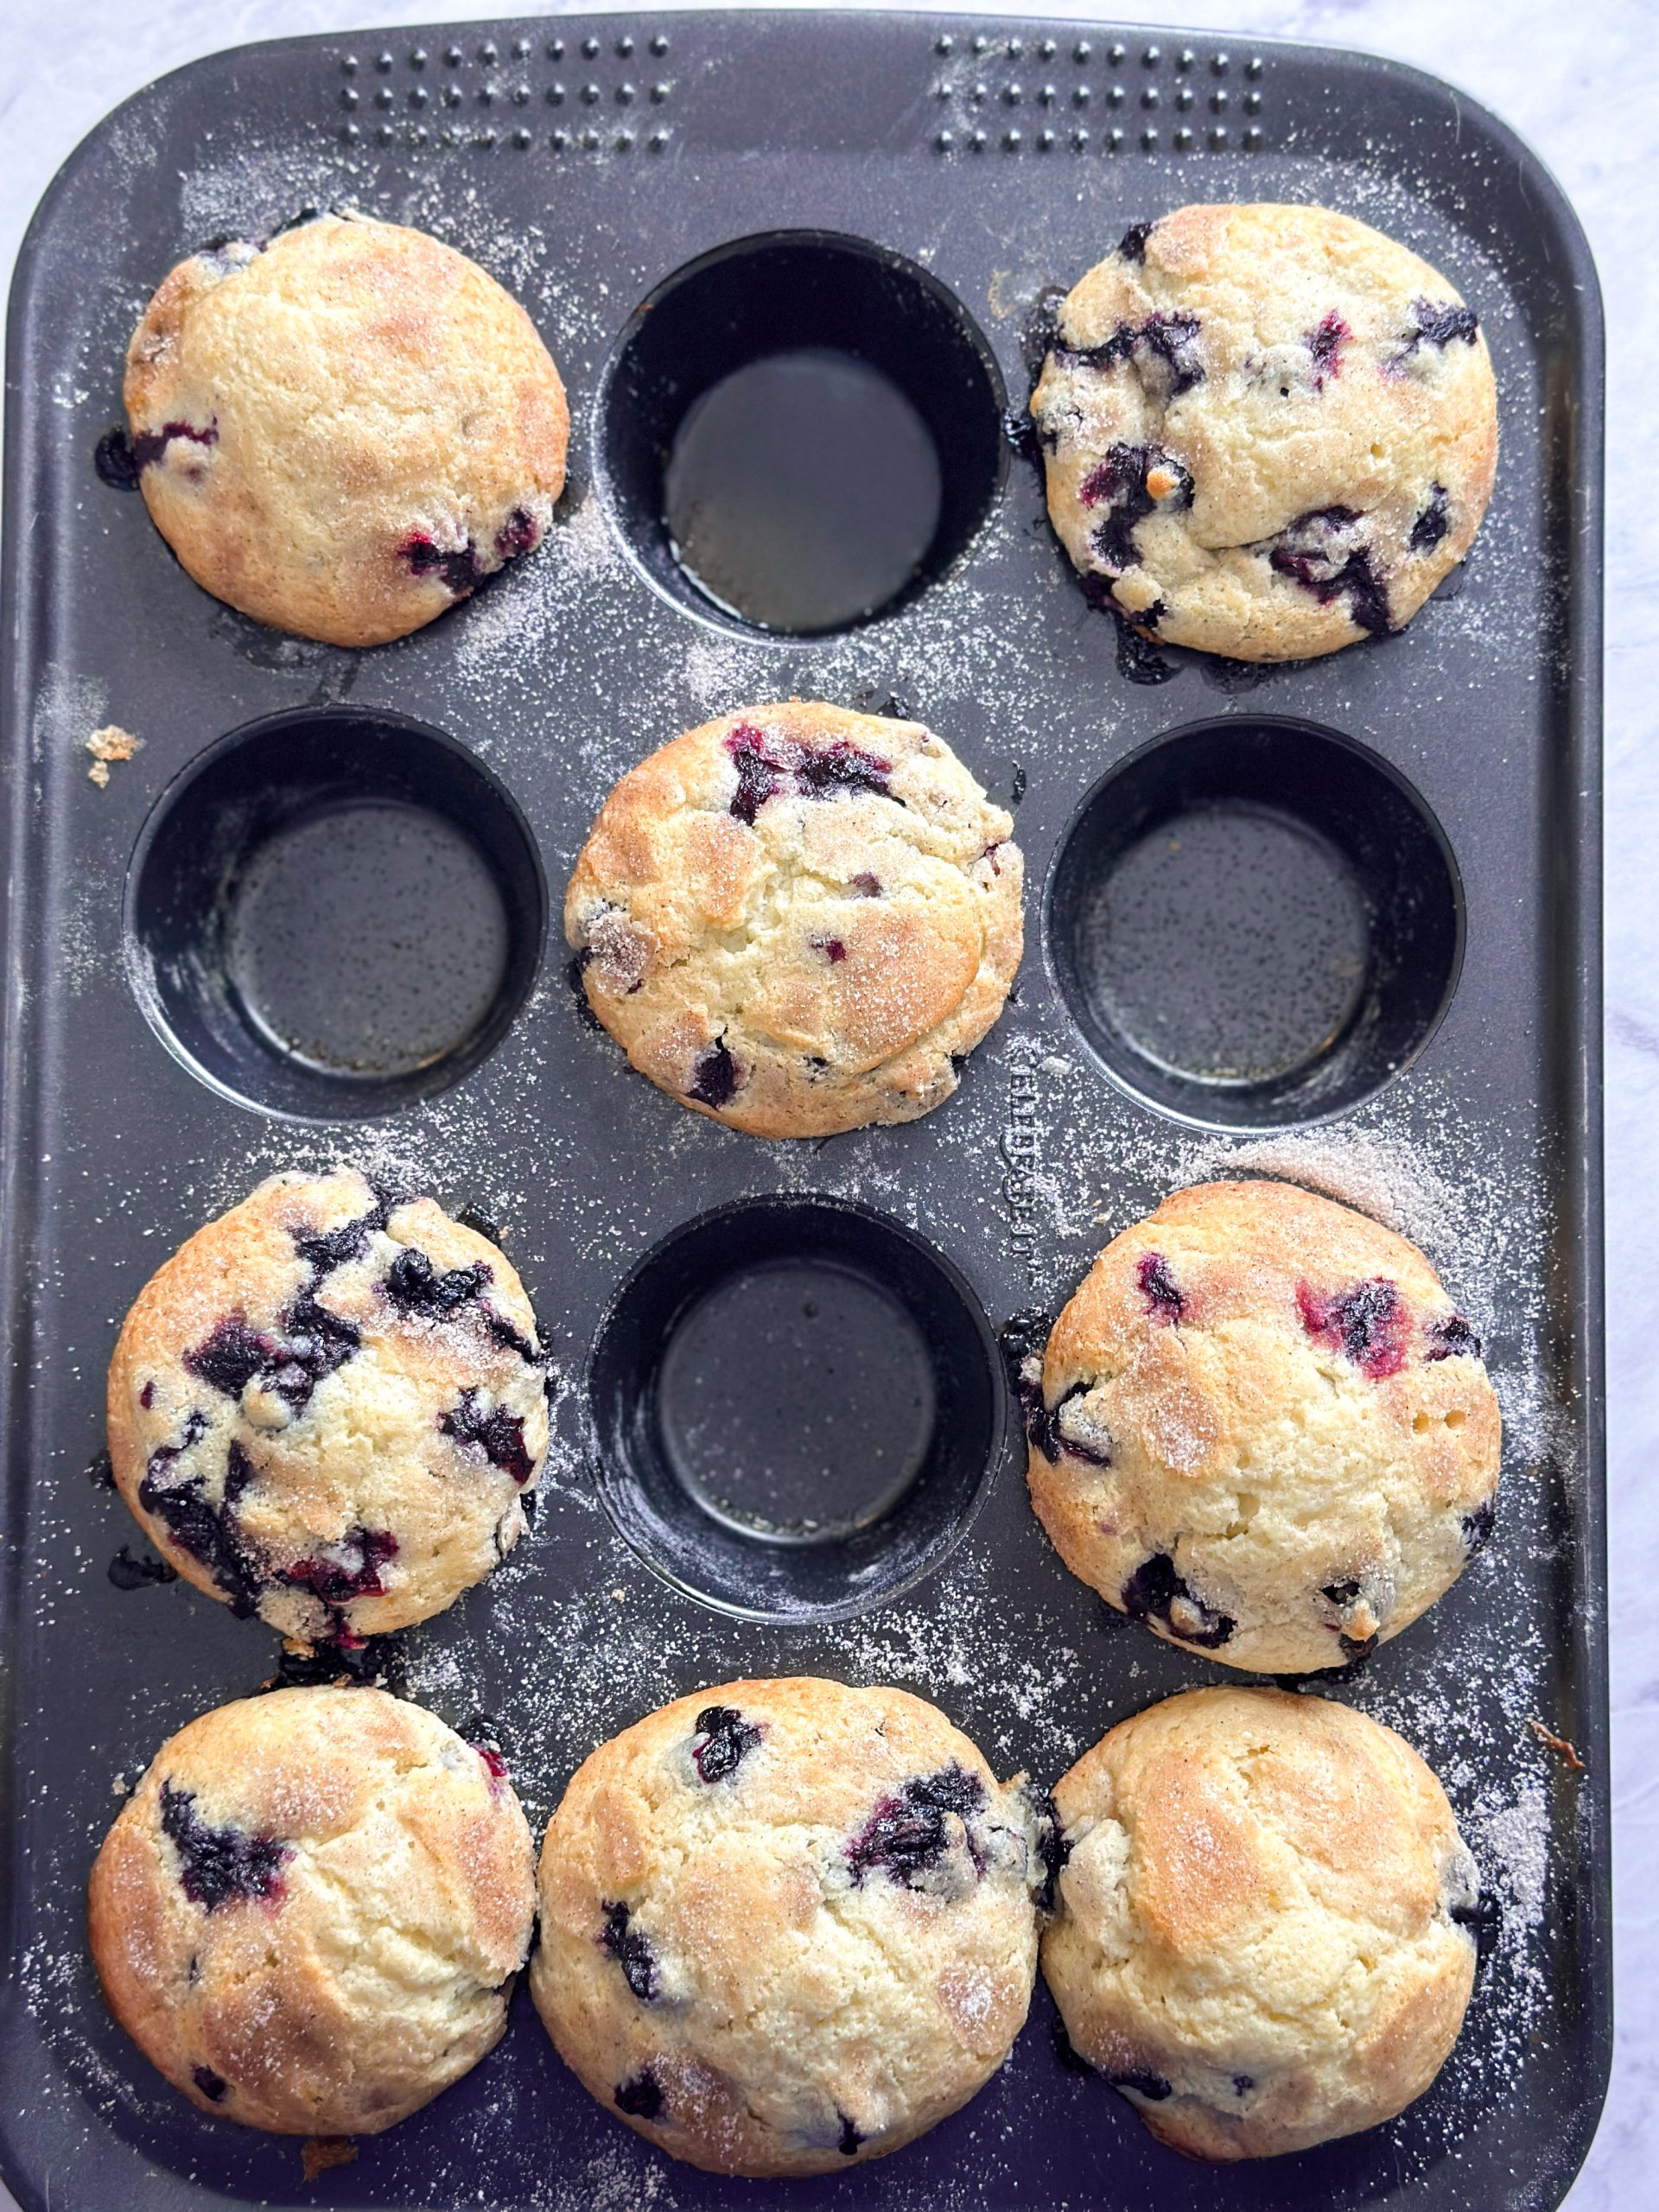 8 blueberry muffins in a muffin tray